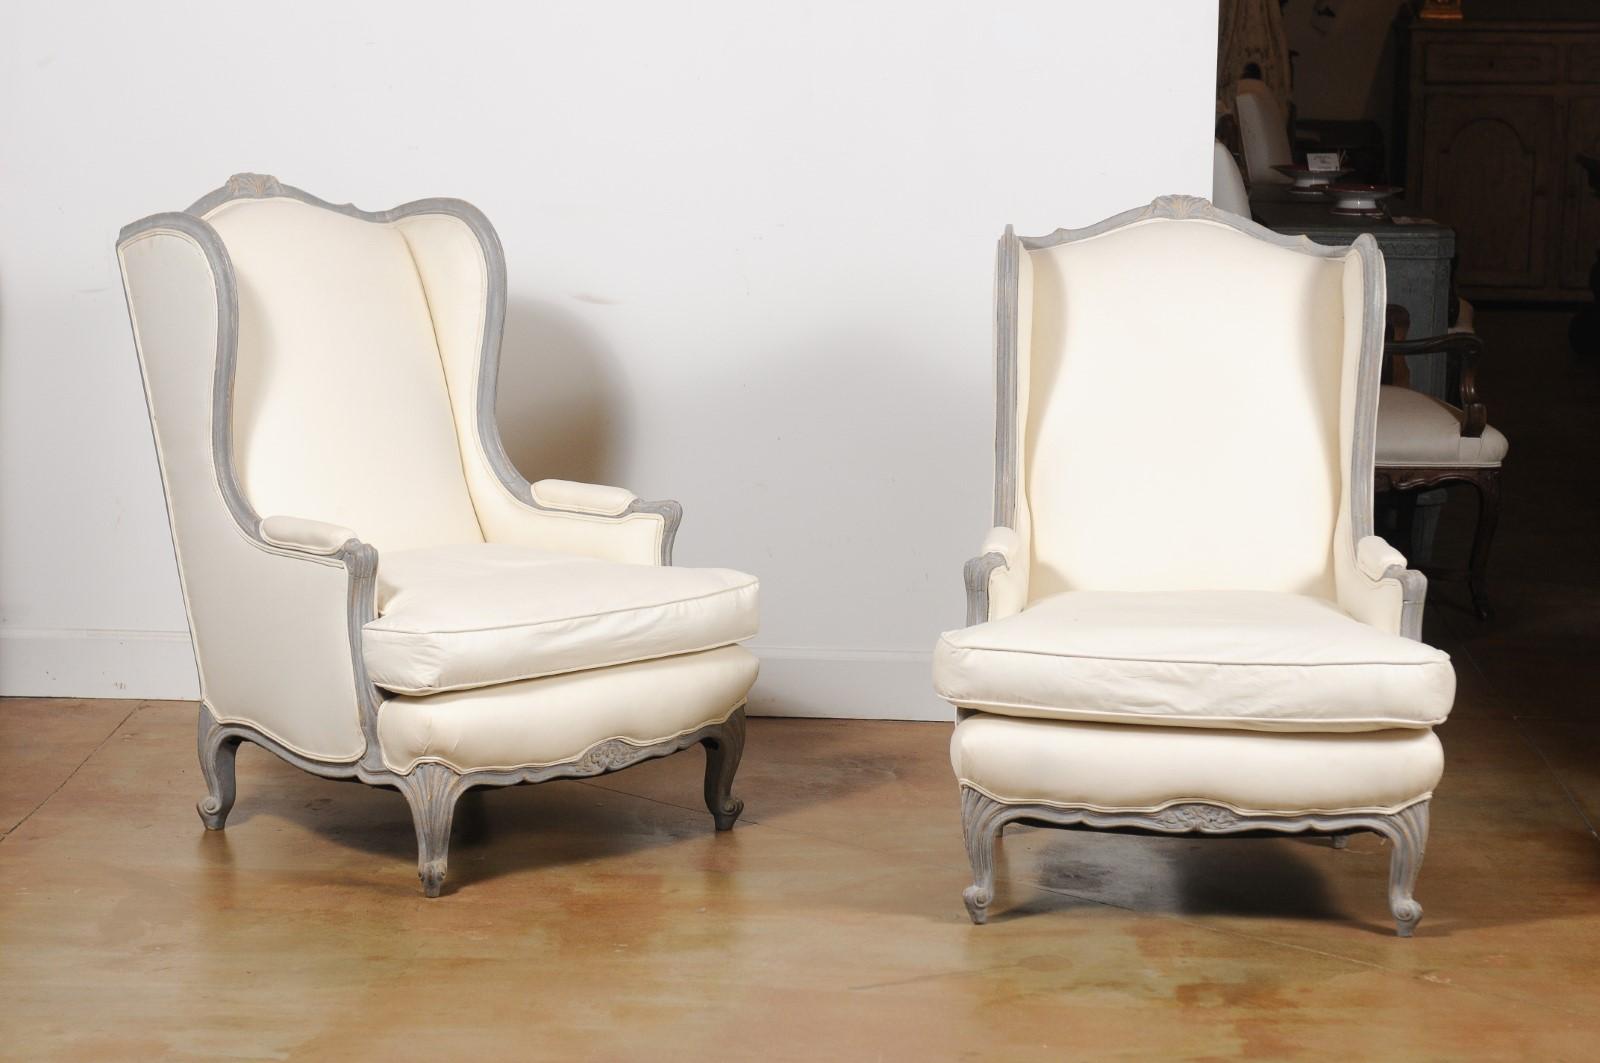 A pair of French Louis XV style painted bergères à oreilles from the late 19th century, with grey painted finish and upholstery. Created in France during the last quarter of the 19th century, each of this pair of bergères features a slanted